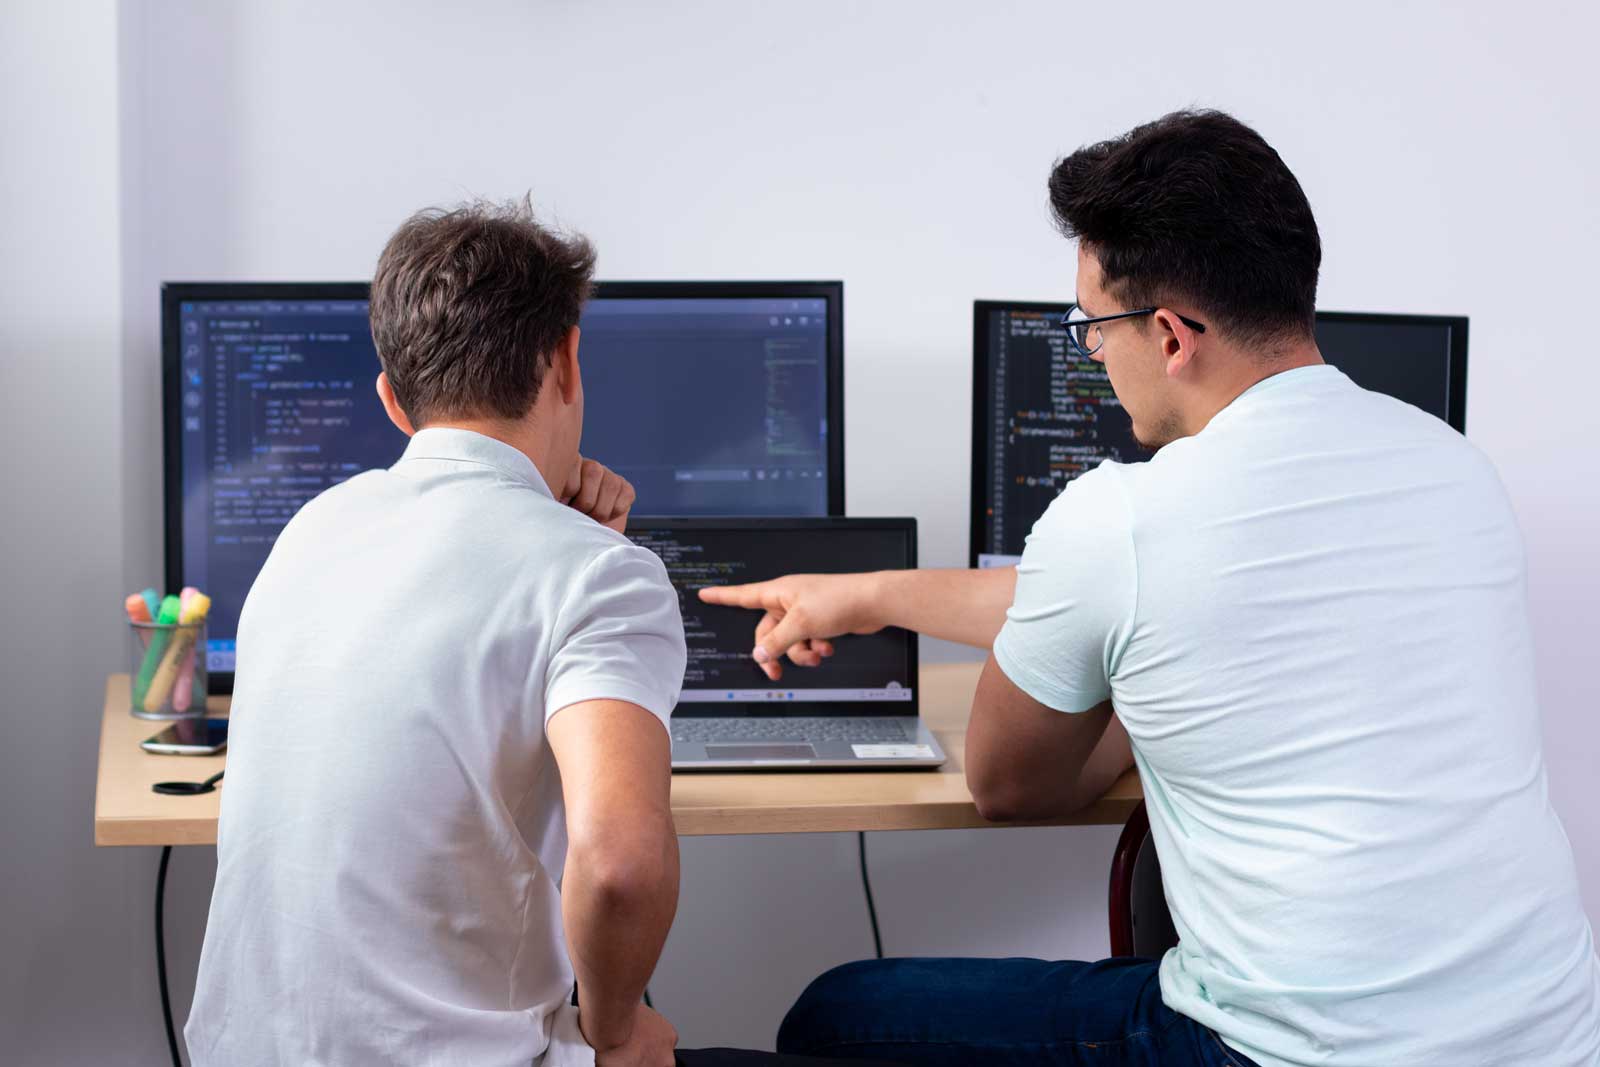 Two developers reviewing code side-by-side